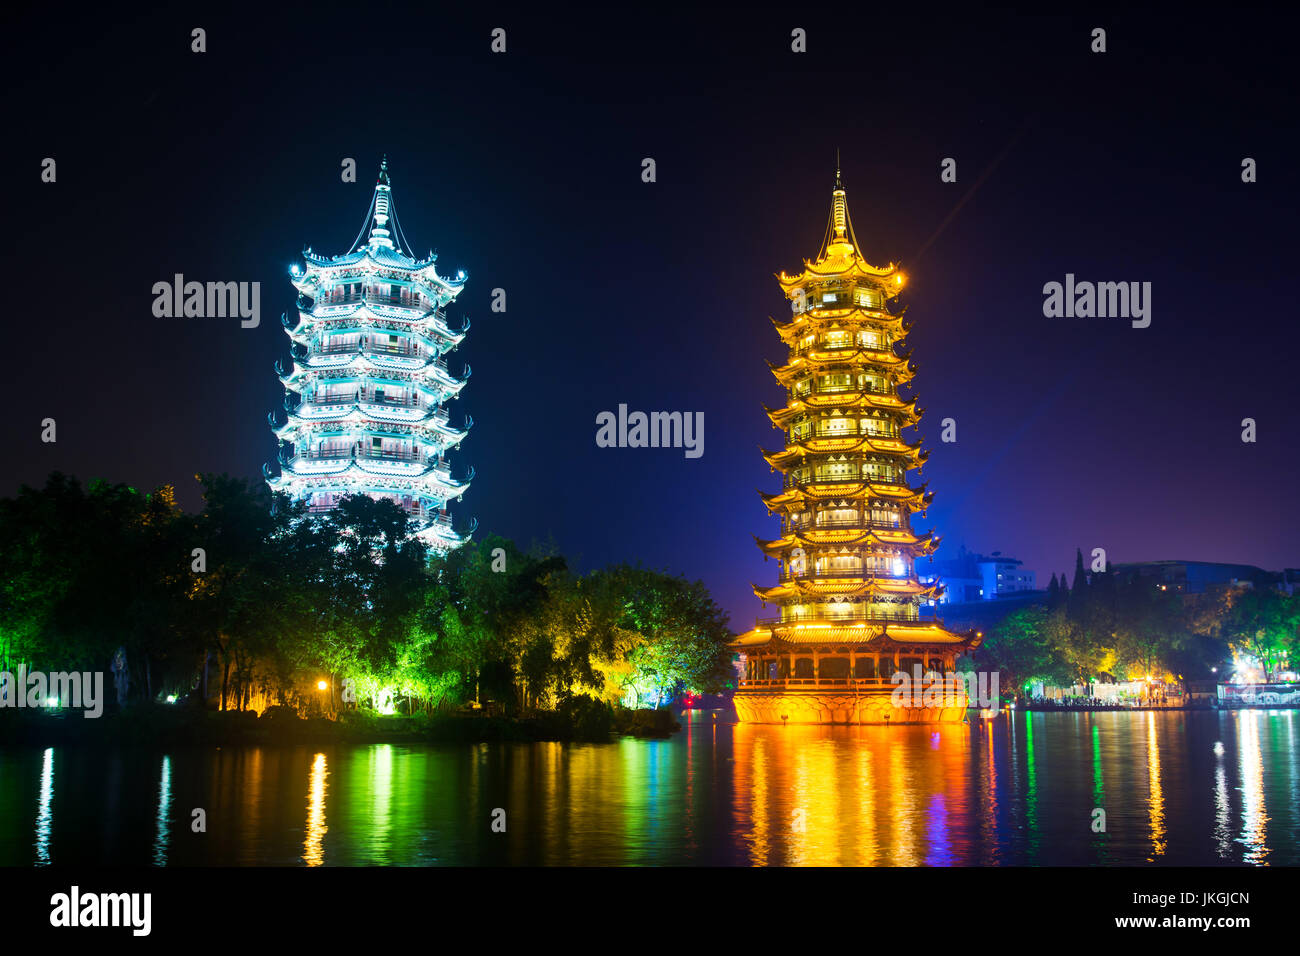 Guilin twin towers in illuminated city park in Guangxi, China Stock Photo